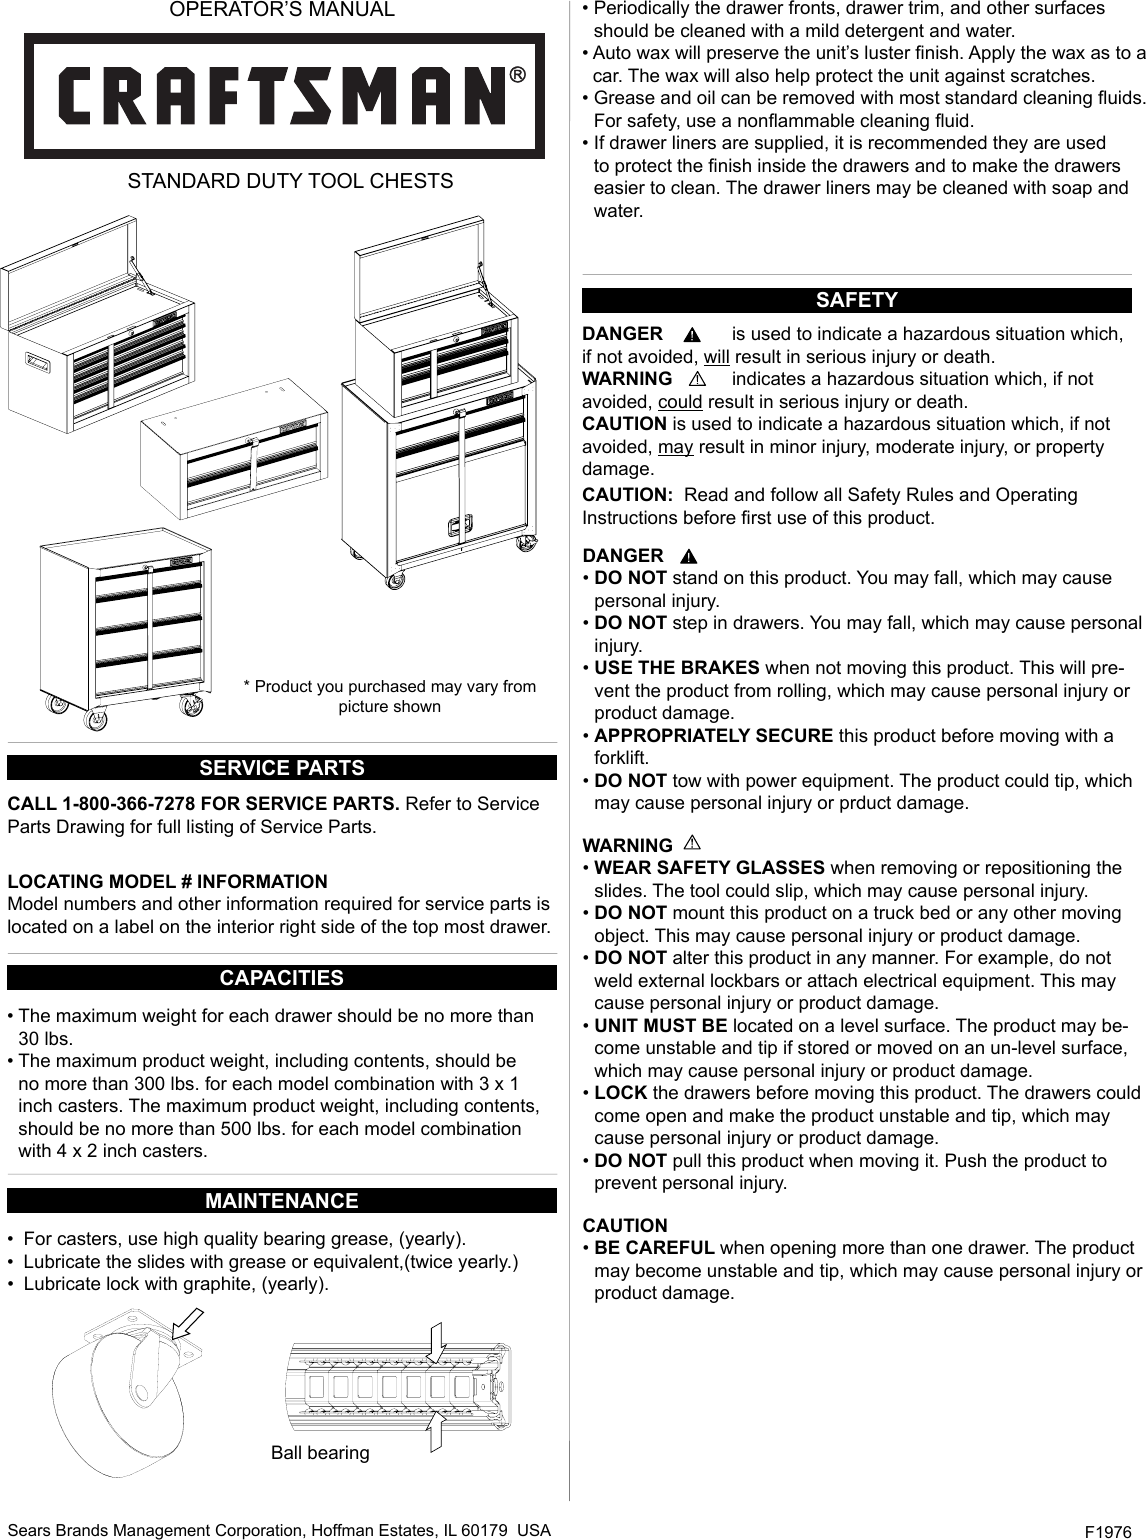 Page 1 of 5 - Craftsman Craftsman-26-In-Wide-3-Drawer-Standard-Duty-Ball-Bearing-Rolling-Cabinet-Red-Use-And-Care-Manual-  Craftsman-26-in-wide-3-drawer-standard-duty-ball-bearing-rolling-cabinet-red-use-and-care-manual